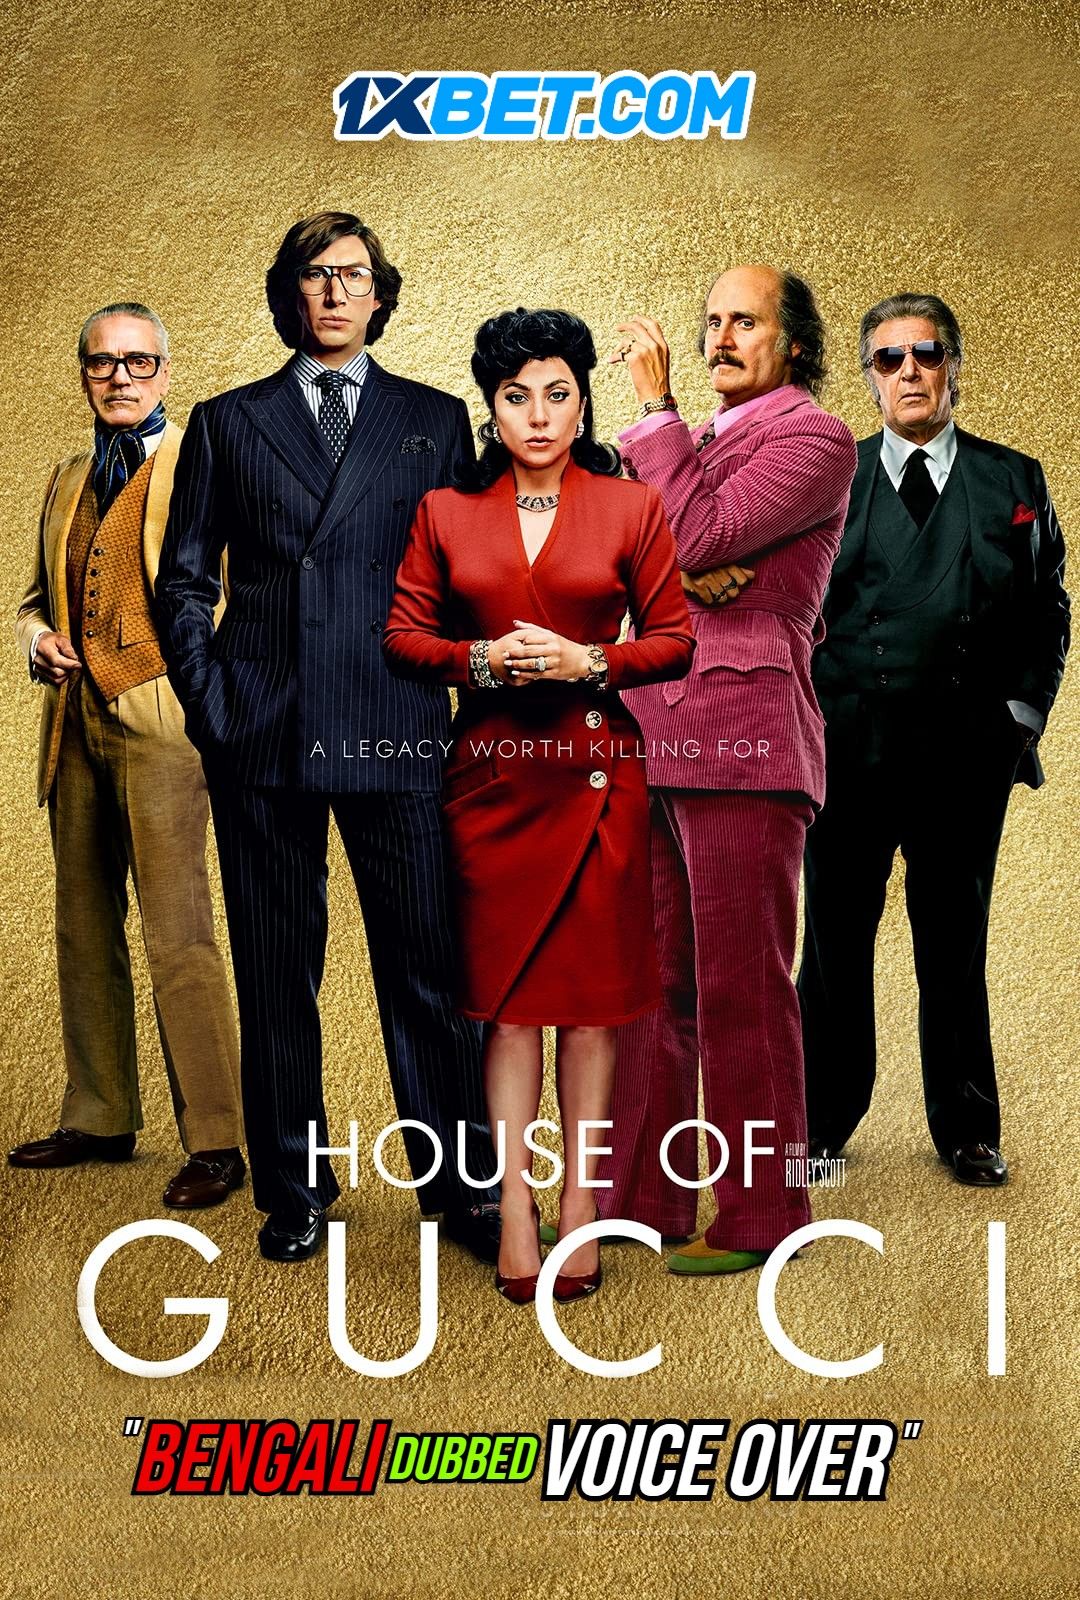 House of Gucci (2021) Bengali (Voice Over) Dubbed HDCAM download full movie